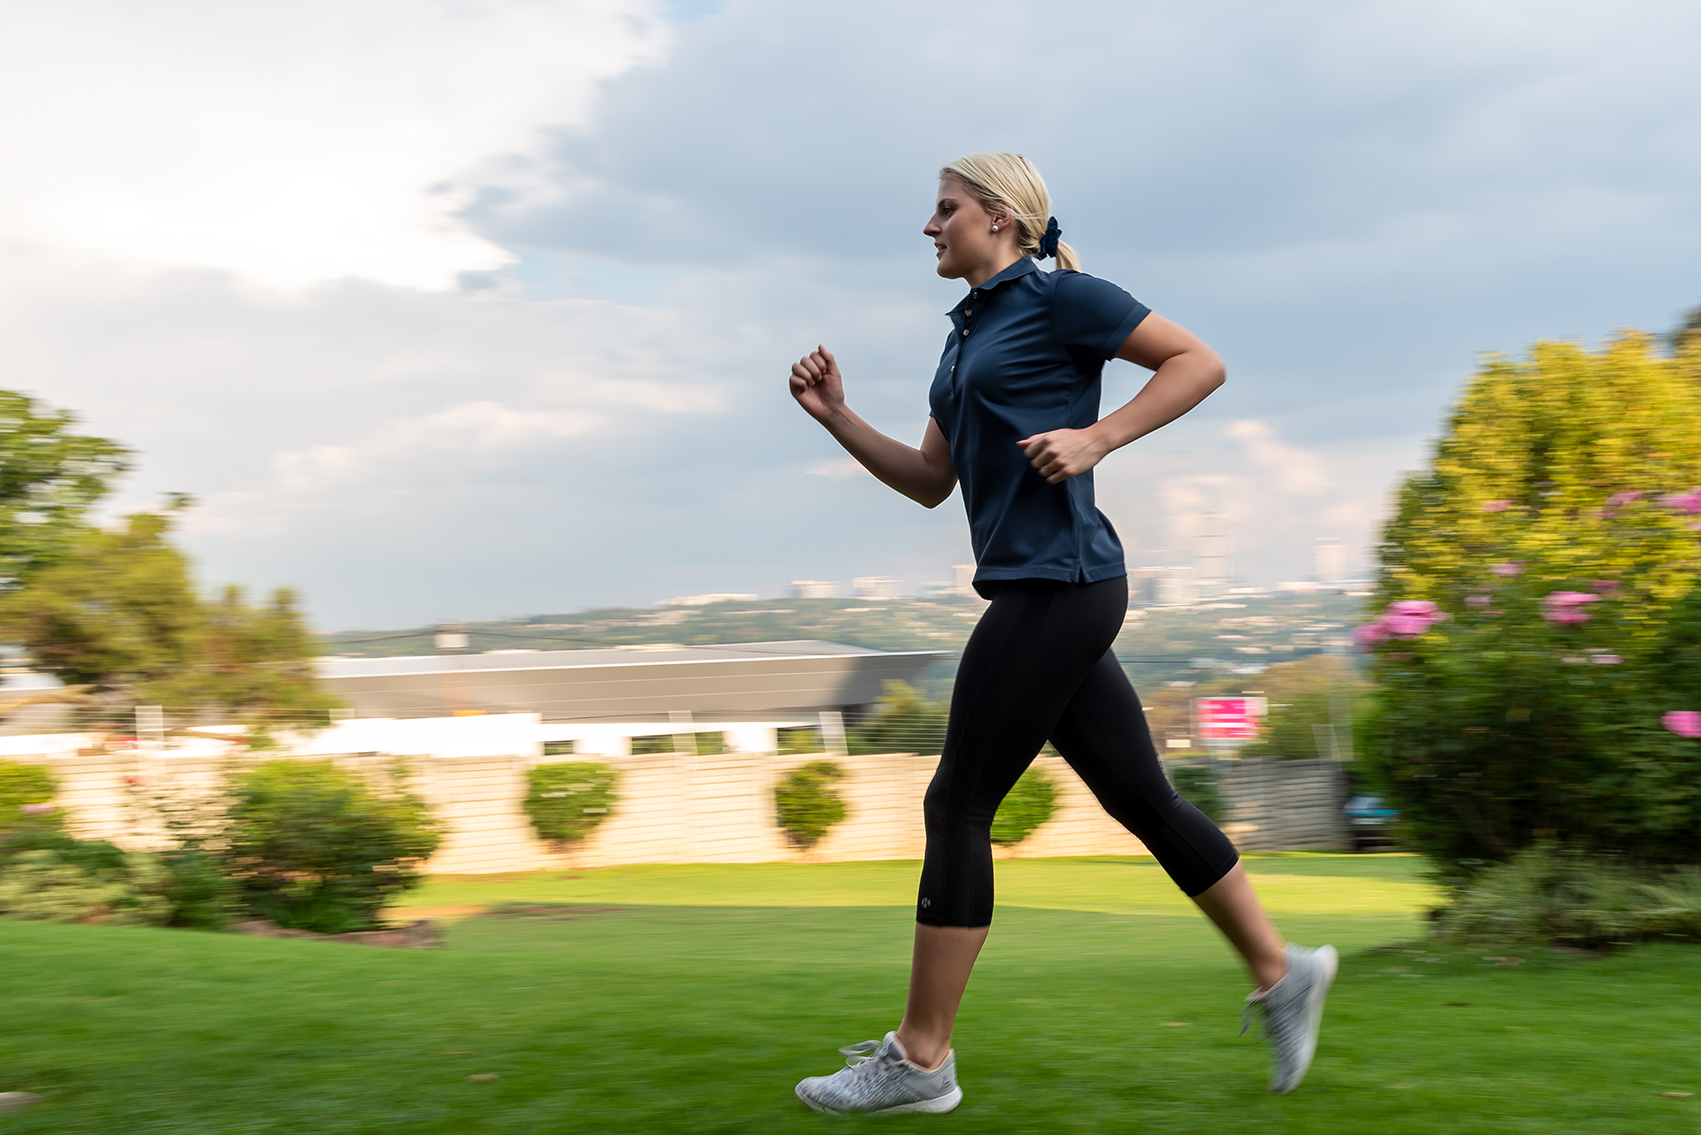 Improve your immune system through exercise like running during the pandemic